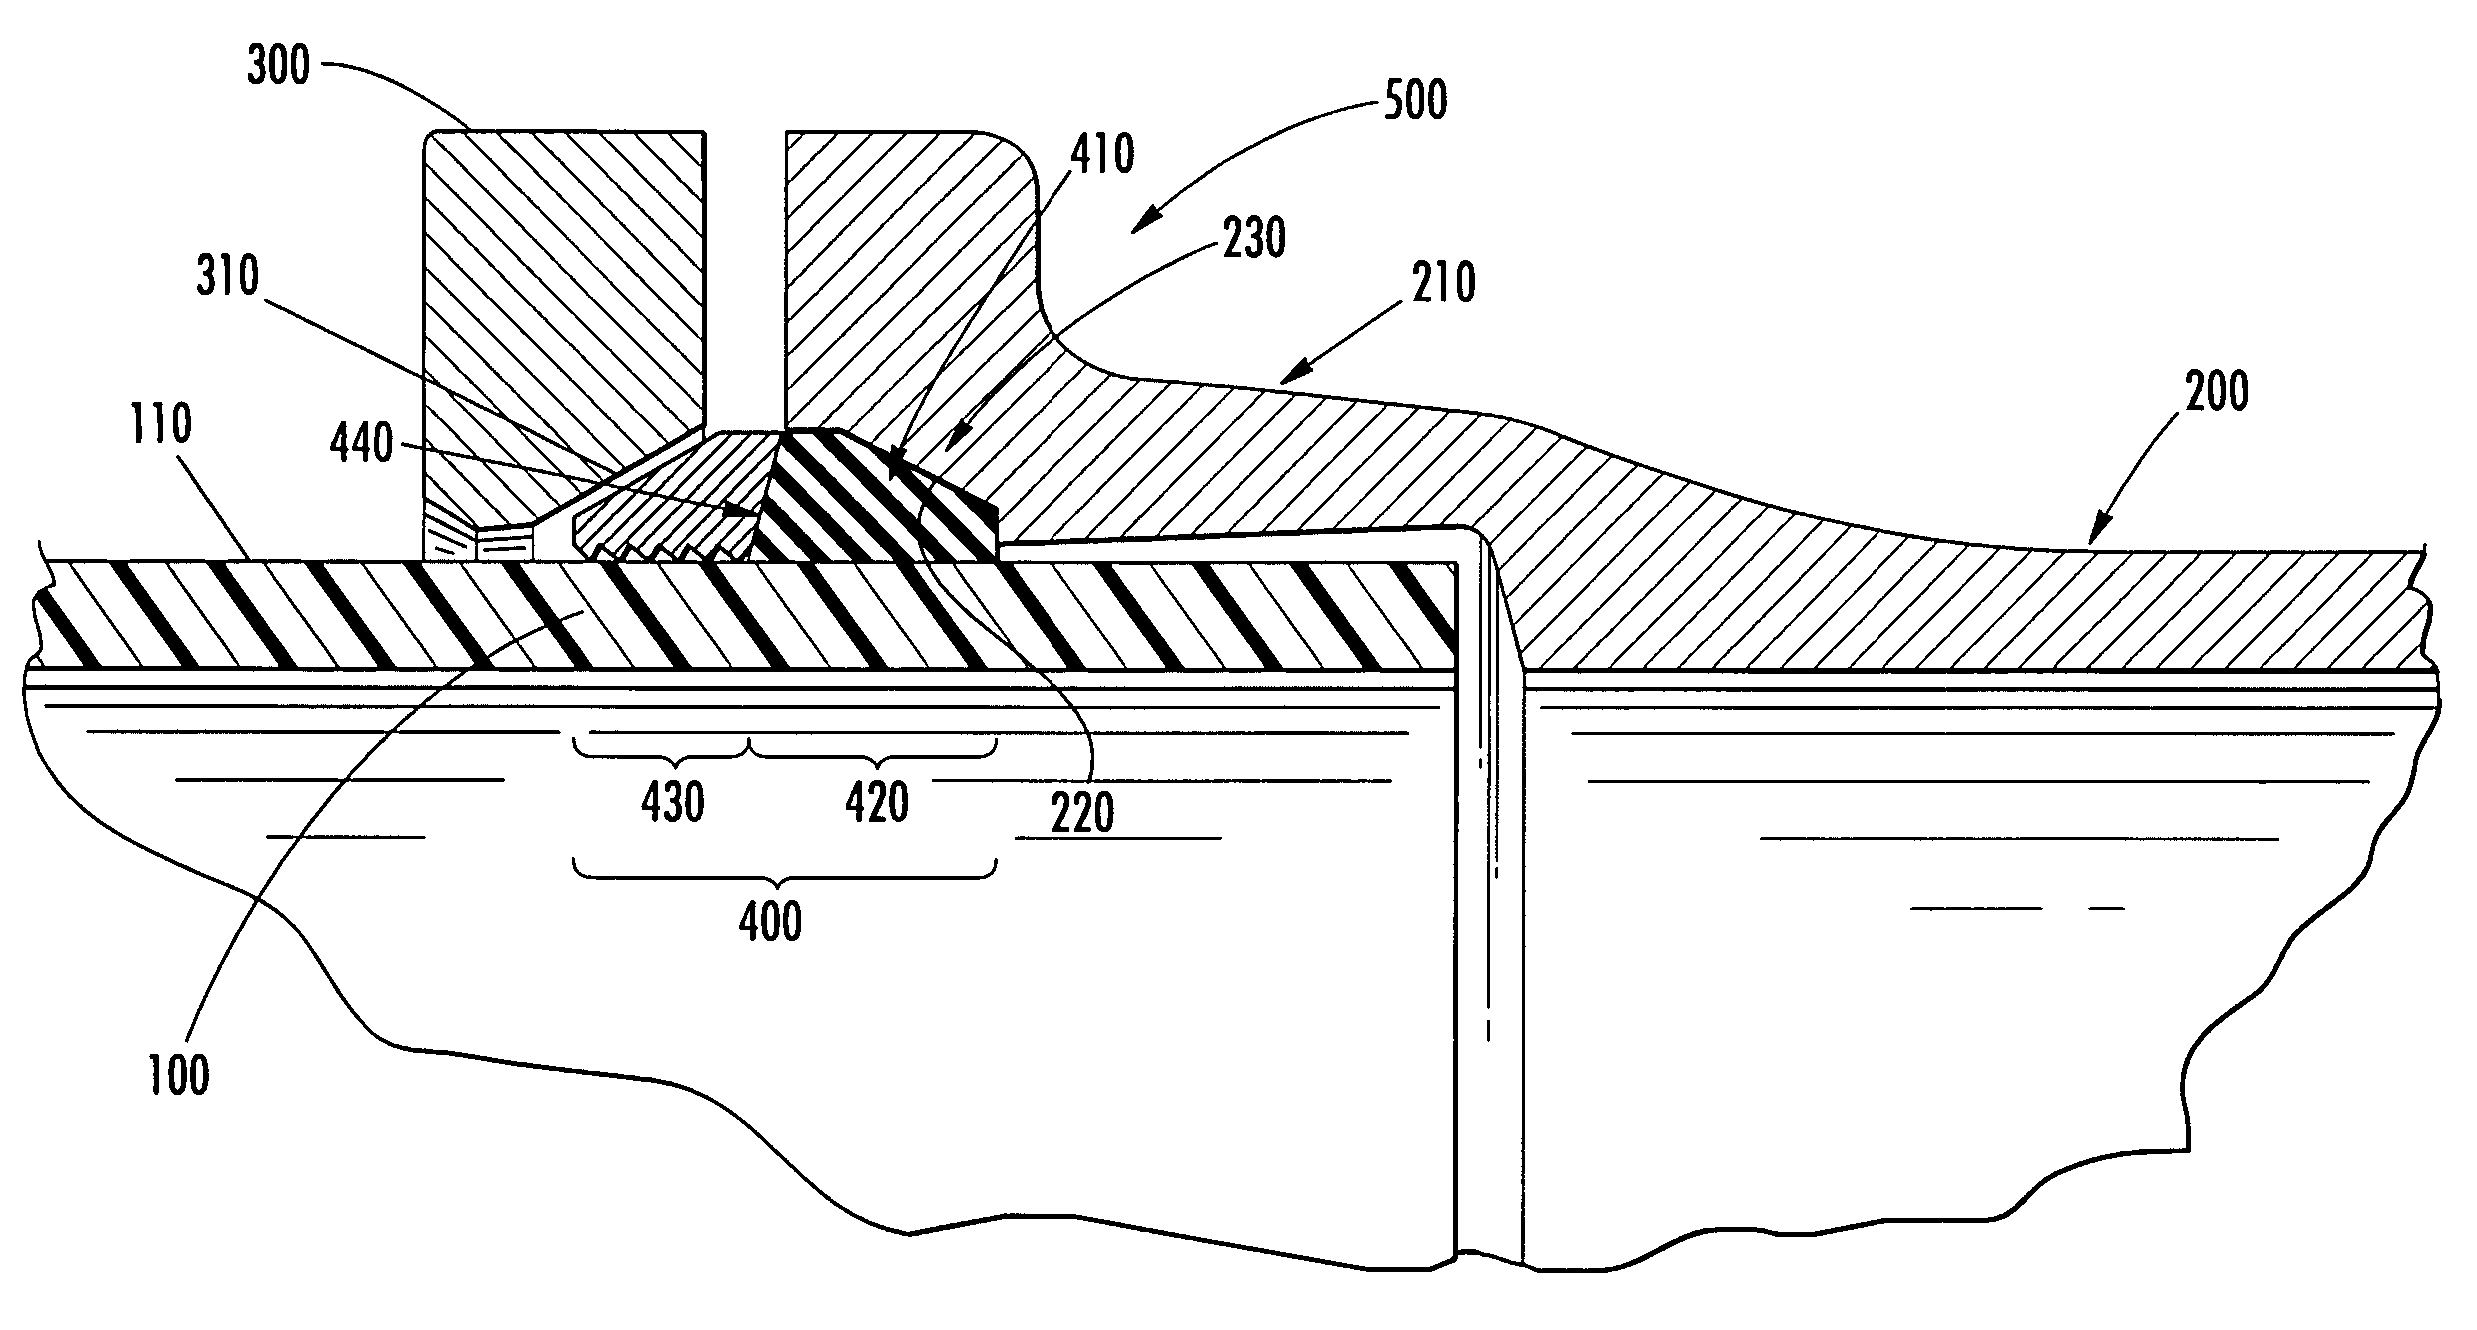 Mechanical pipe joint, gasket, and method for restraining pipe spigots in mechanical pipe joint bell sockets